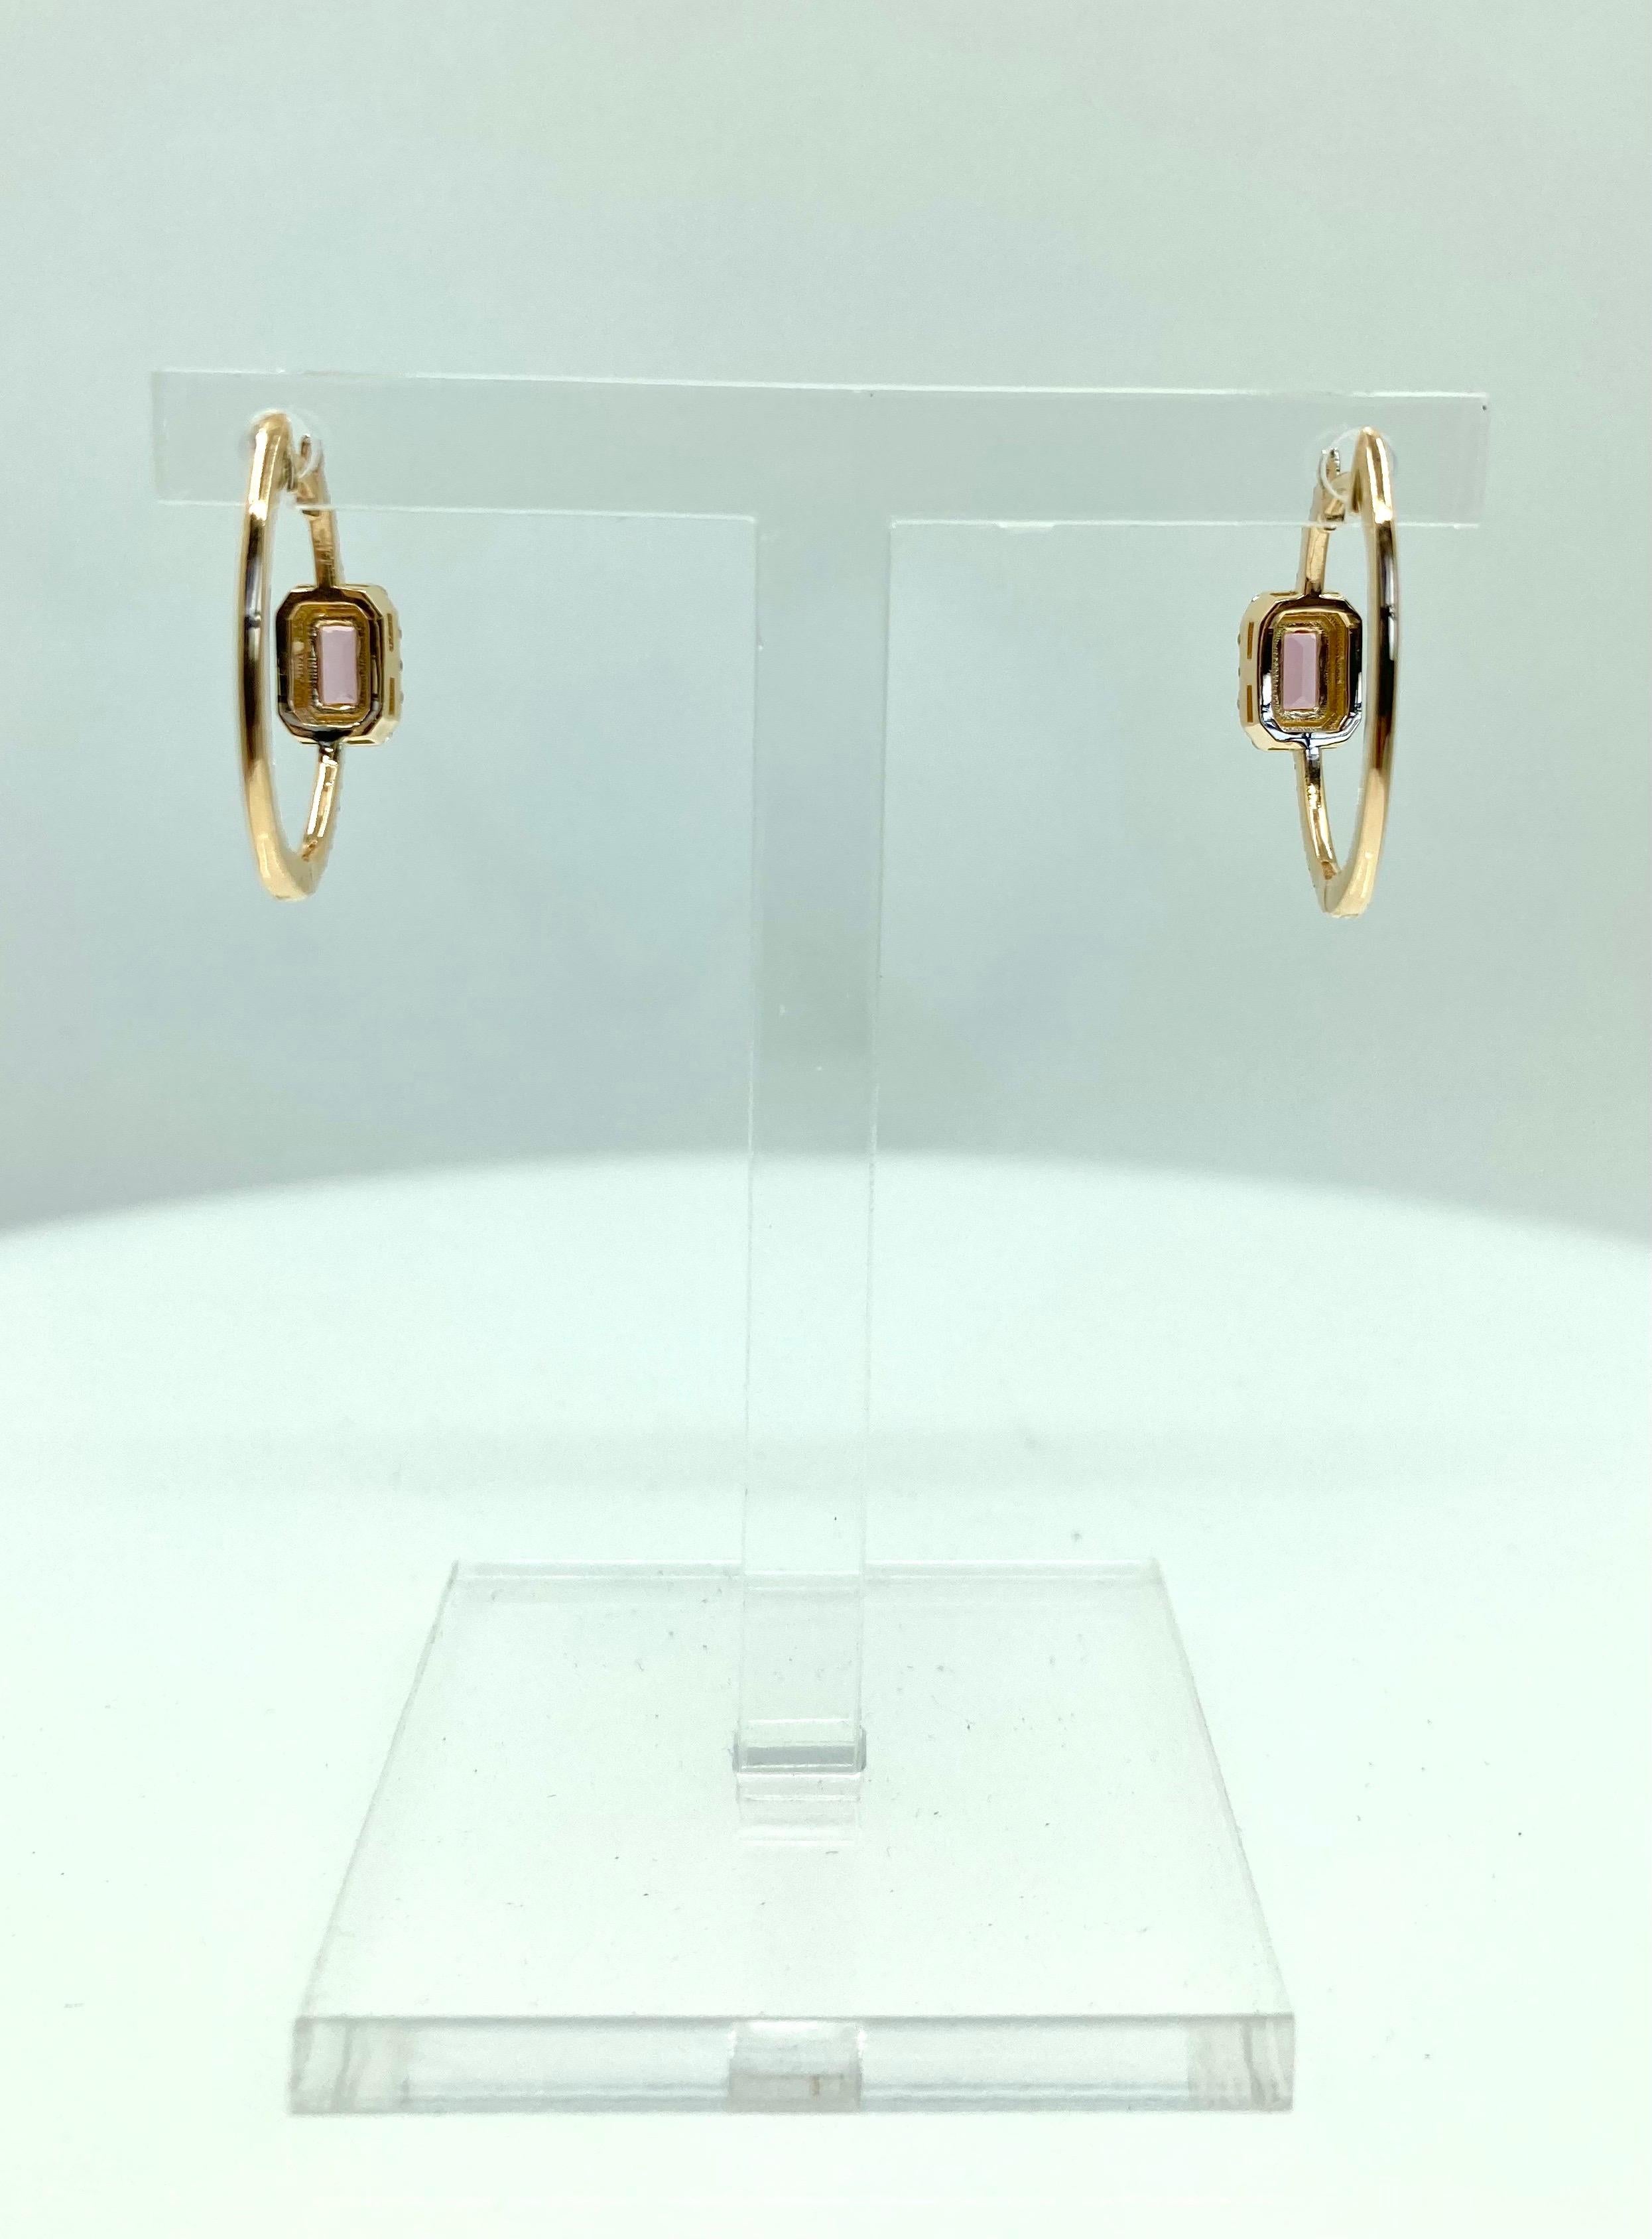 Timeless rose gold earrings, with pink tourmalines ct. 0.50 and diamonds ct. 0.31 , handmade in Italy by Roberto Casarin

Elegant colourful earrings, stylish and perfect on any attire. The warm color of the central Tourmaline and the rose gold